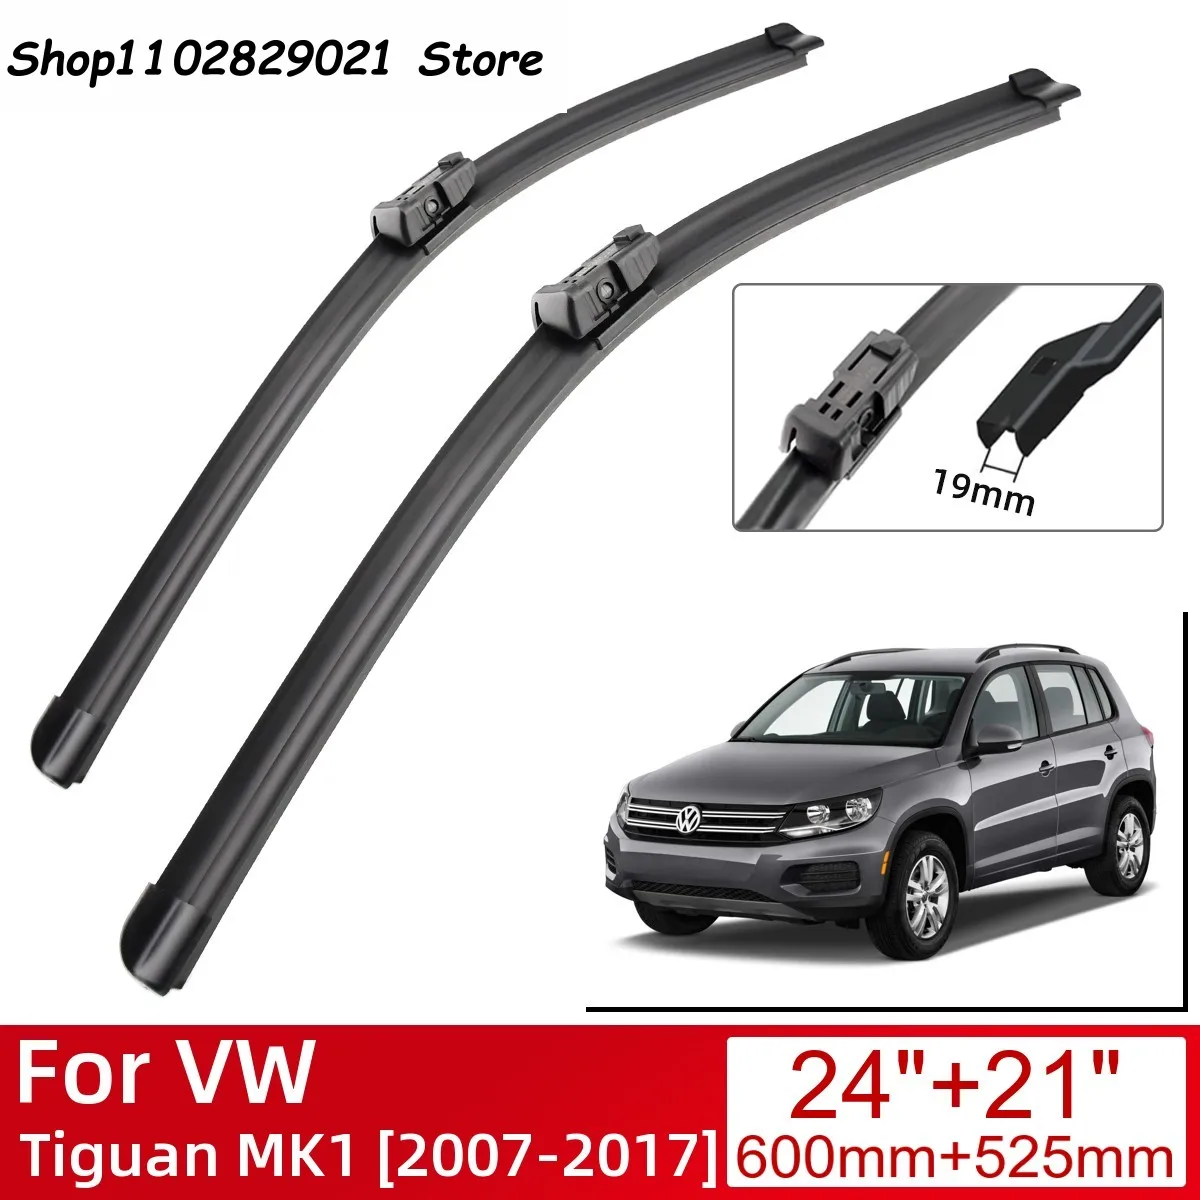 

For VW Tiguan MK1 2007-2017 Car Accessories Front Windscreen Wiper Blade Brushes Wipers 2017 2016 2015 2014 2013 2012 2011 2010